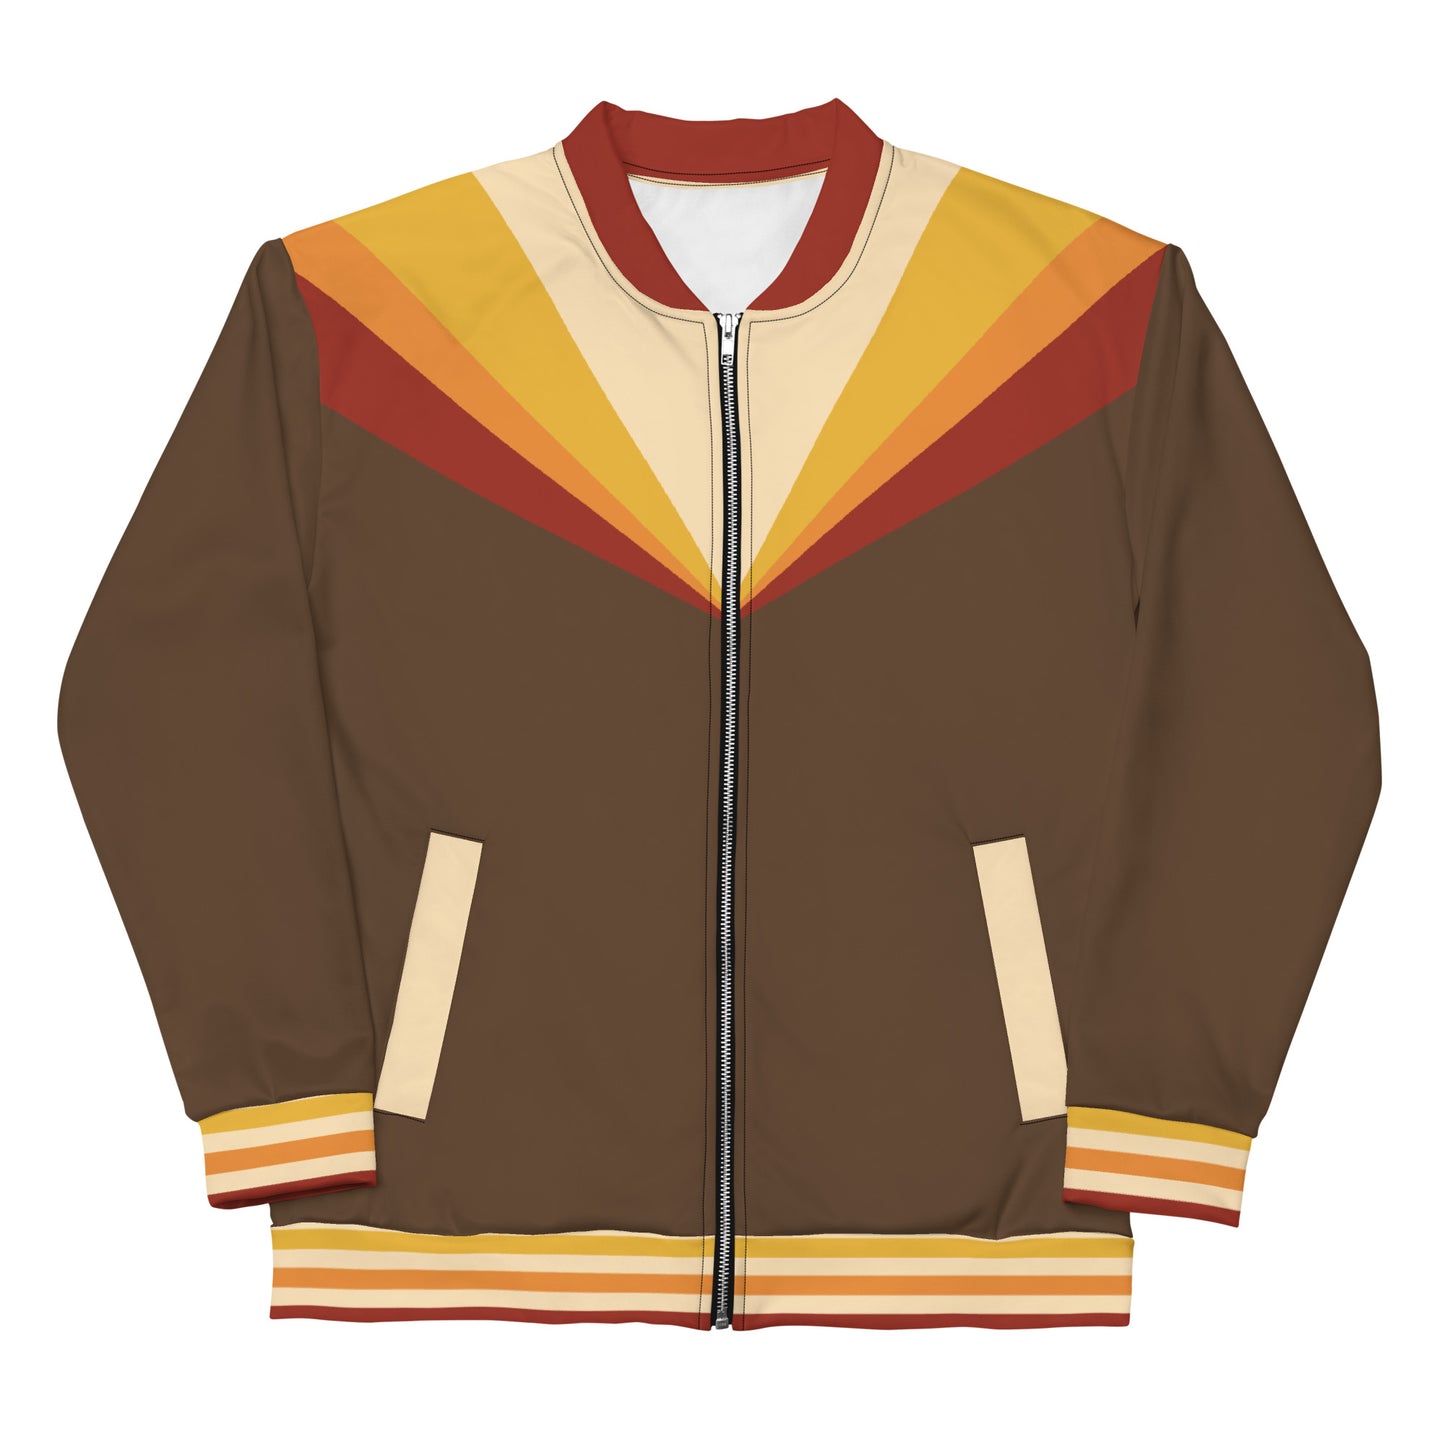 Wildfire Cigars Camp Counselor all over printed light jacket in brown, red, gold, and cream facing the front